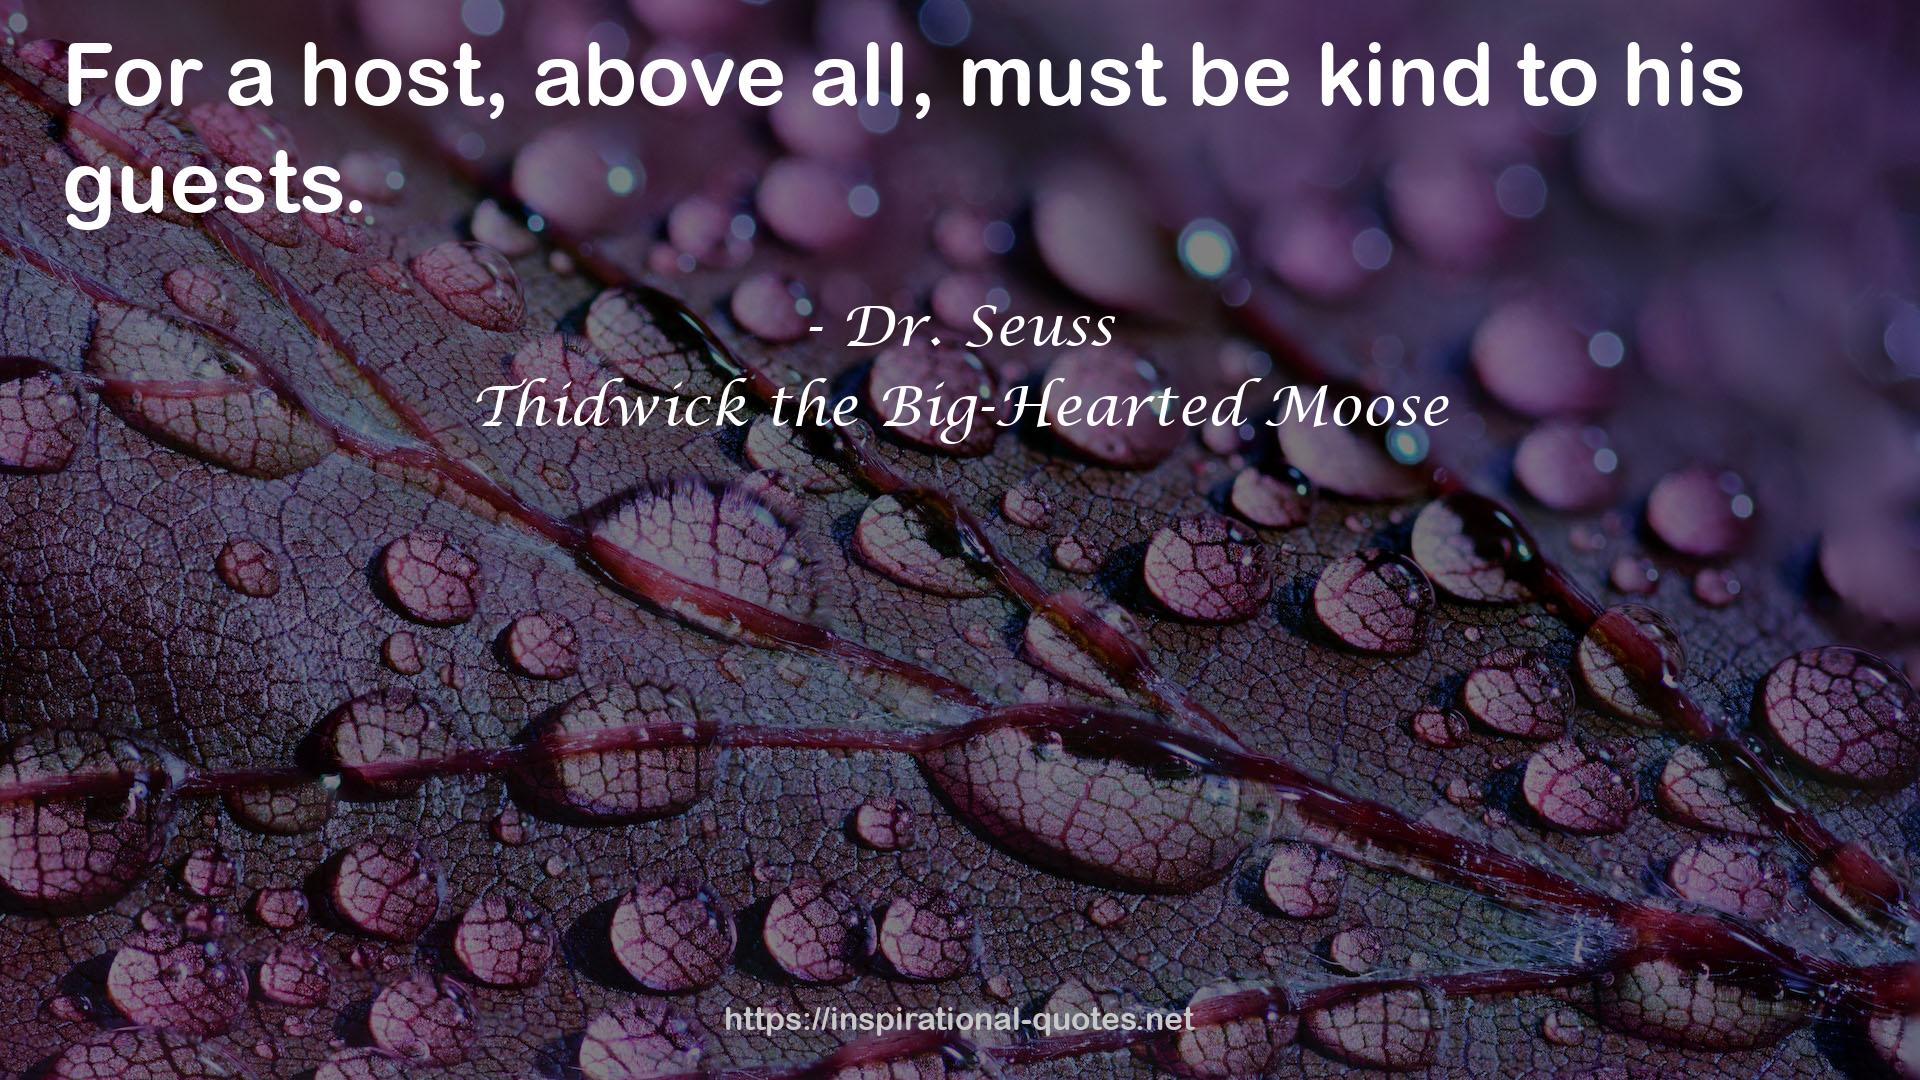 Thidwick the Big-Hearted Moose QUOTES